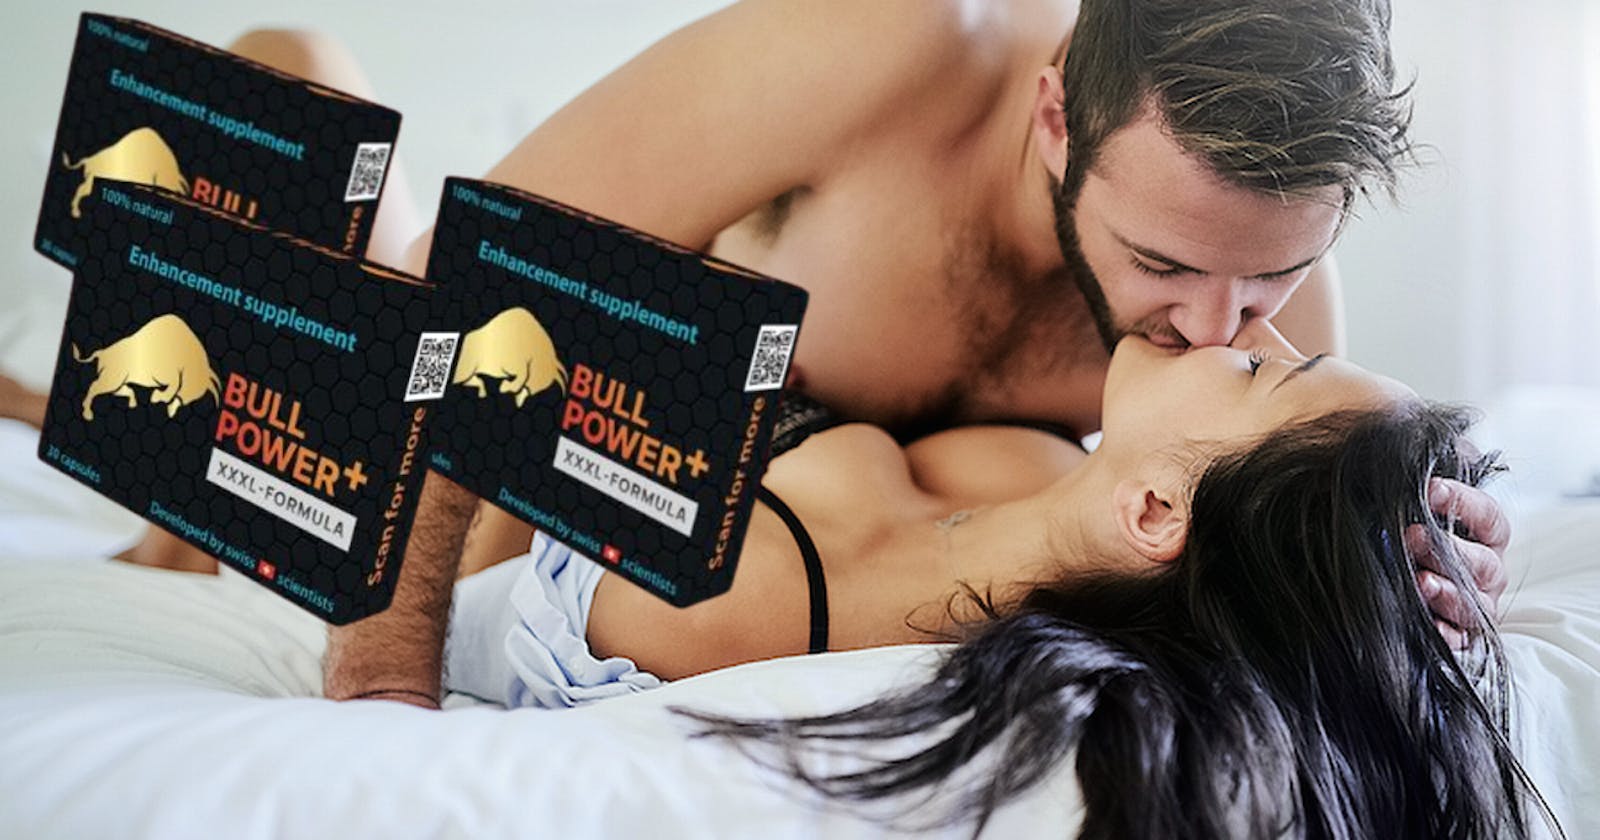 Bull Power + Male Enhancement (FAKE INGREDIENTS ALERT) Does It Is Work Or Just Scam?